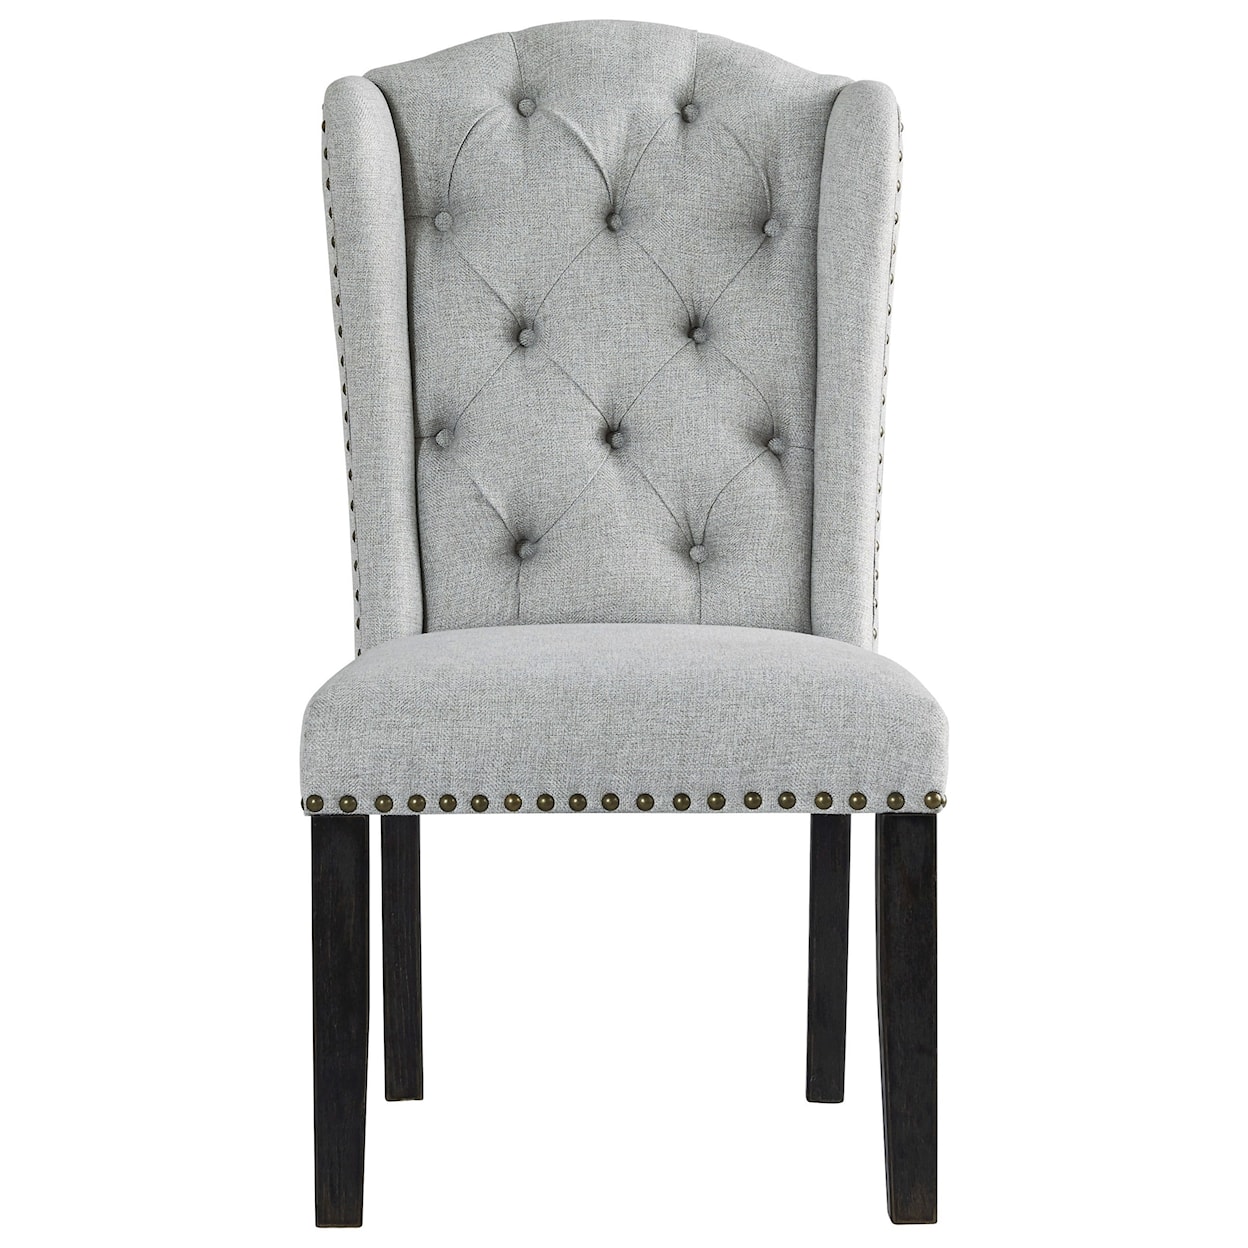 Benchcraft Jeanette Dining Upholstered Side Chair